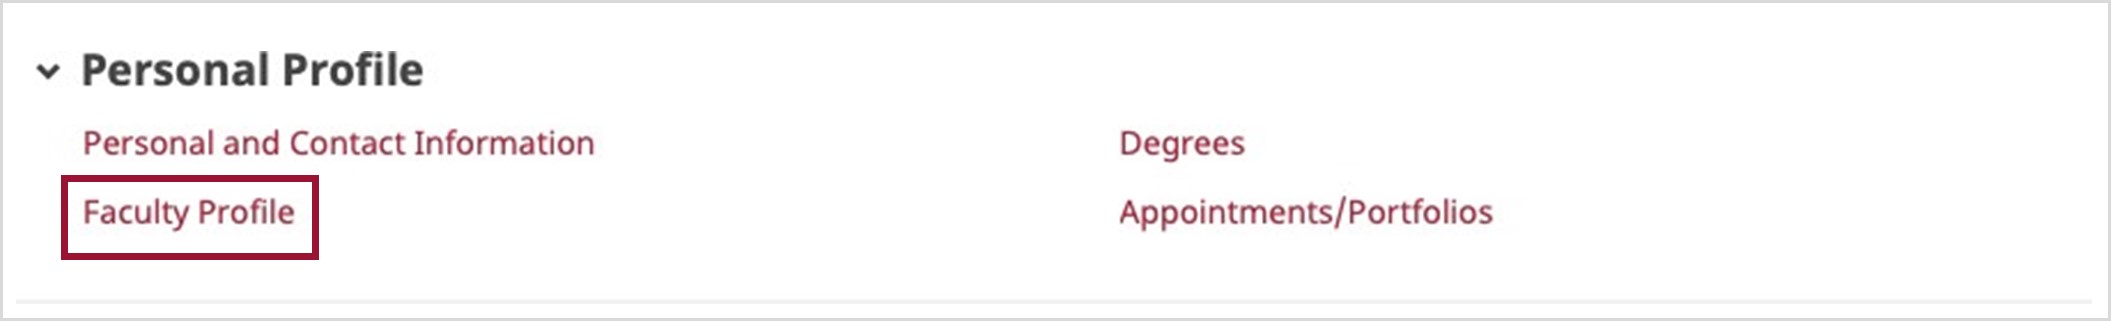 The Personal Profile section of the user's Faculty Activity Portal. There are four choices under the Personal Profile: Personal and Contact Information, Faculty Profile, Degrees, and Appointments/Portfolios. Faculty Profile is higlighted.